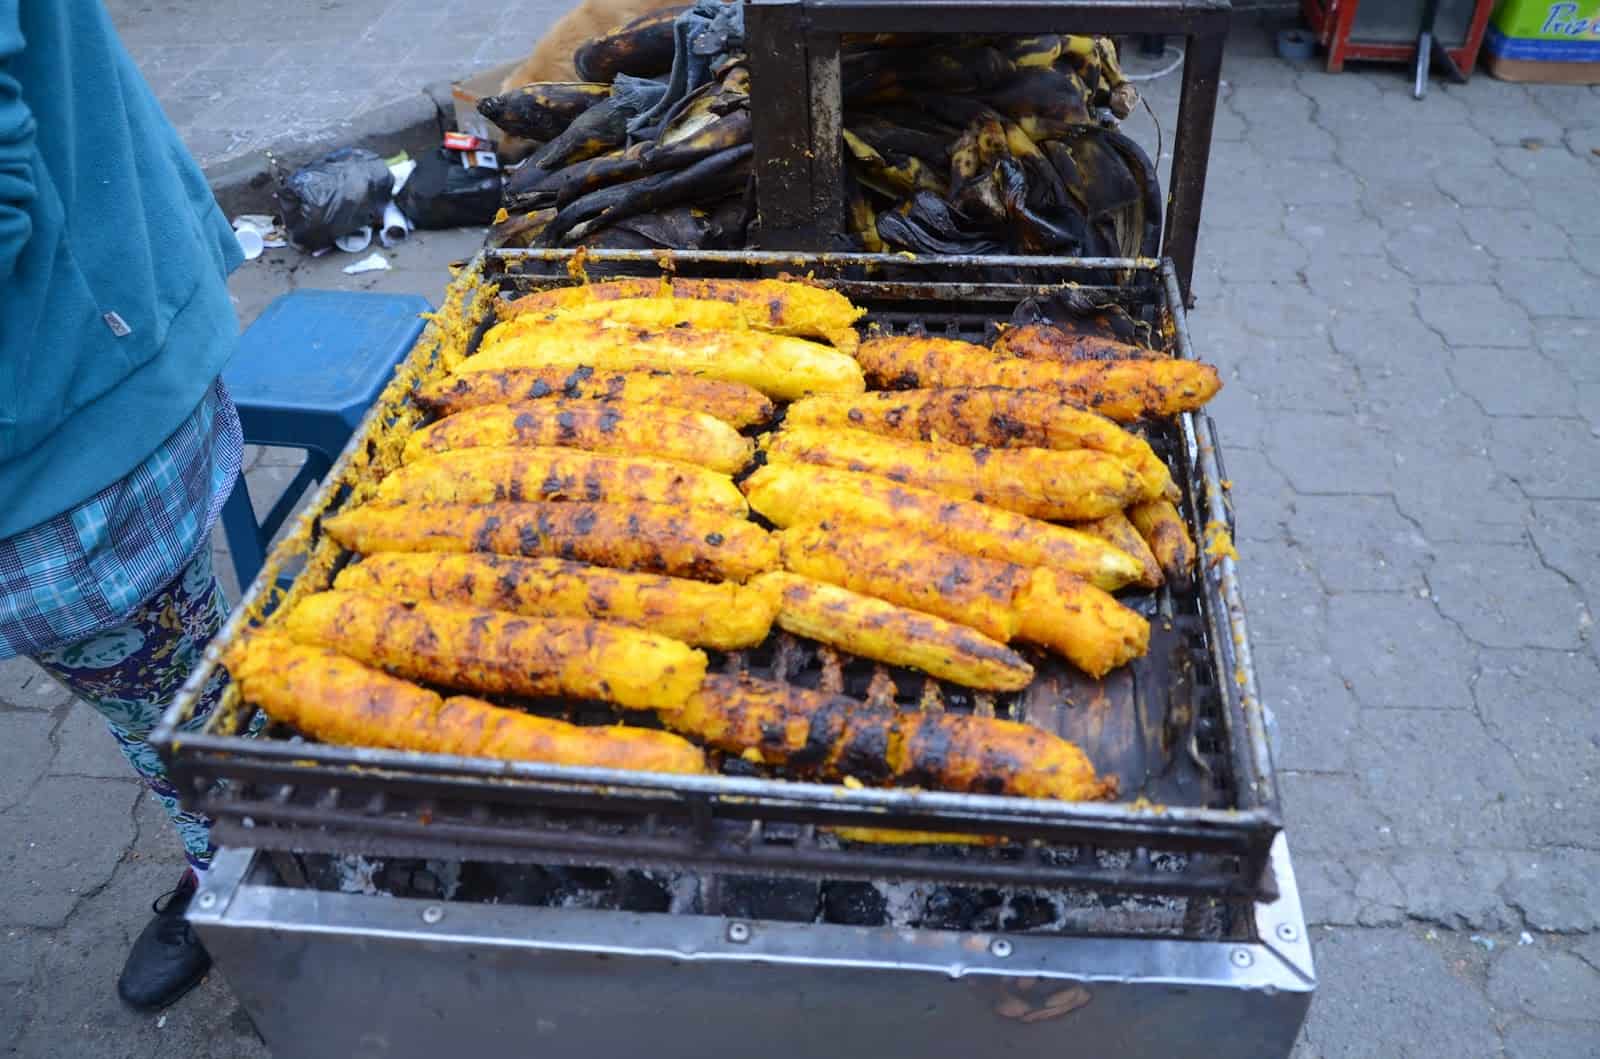 Grilled plantains at the daily market in Otavalo, Ecuador